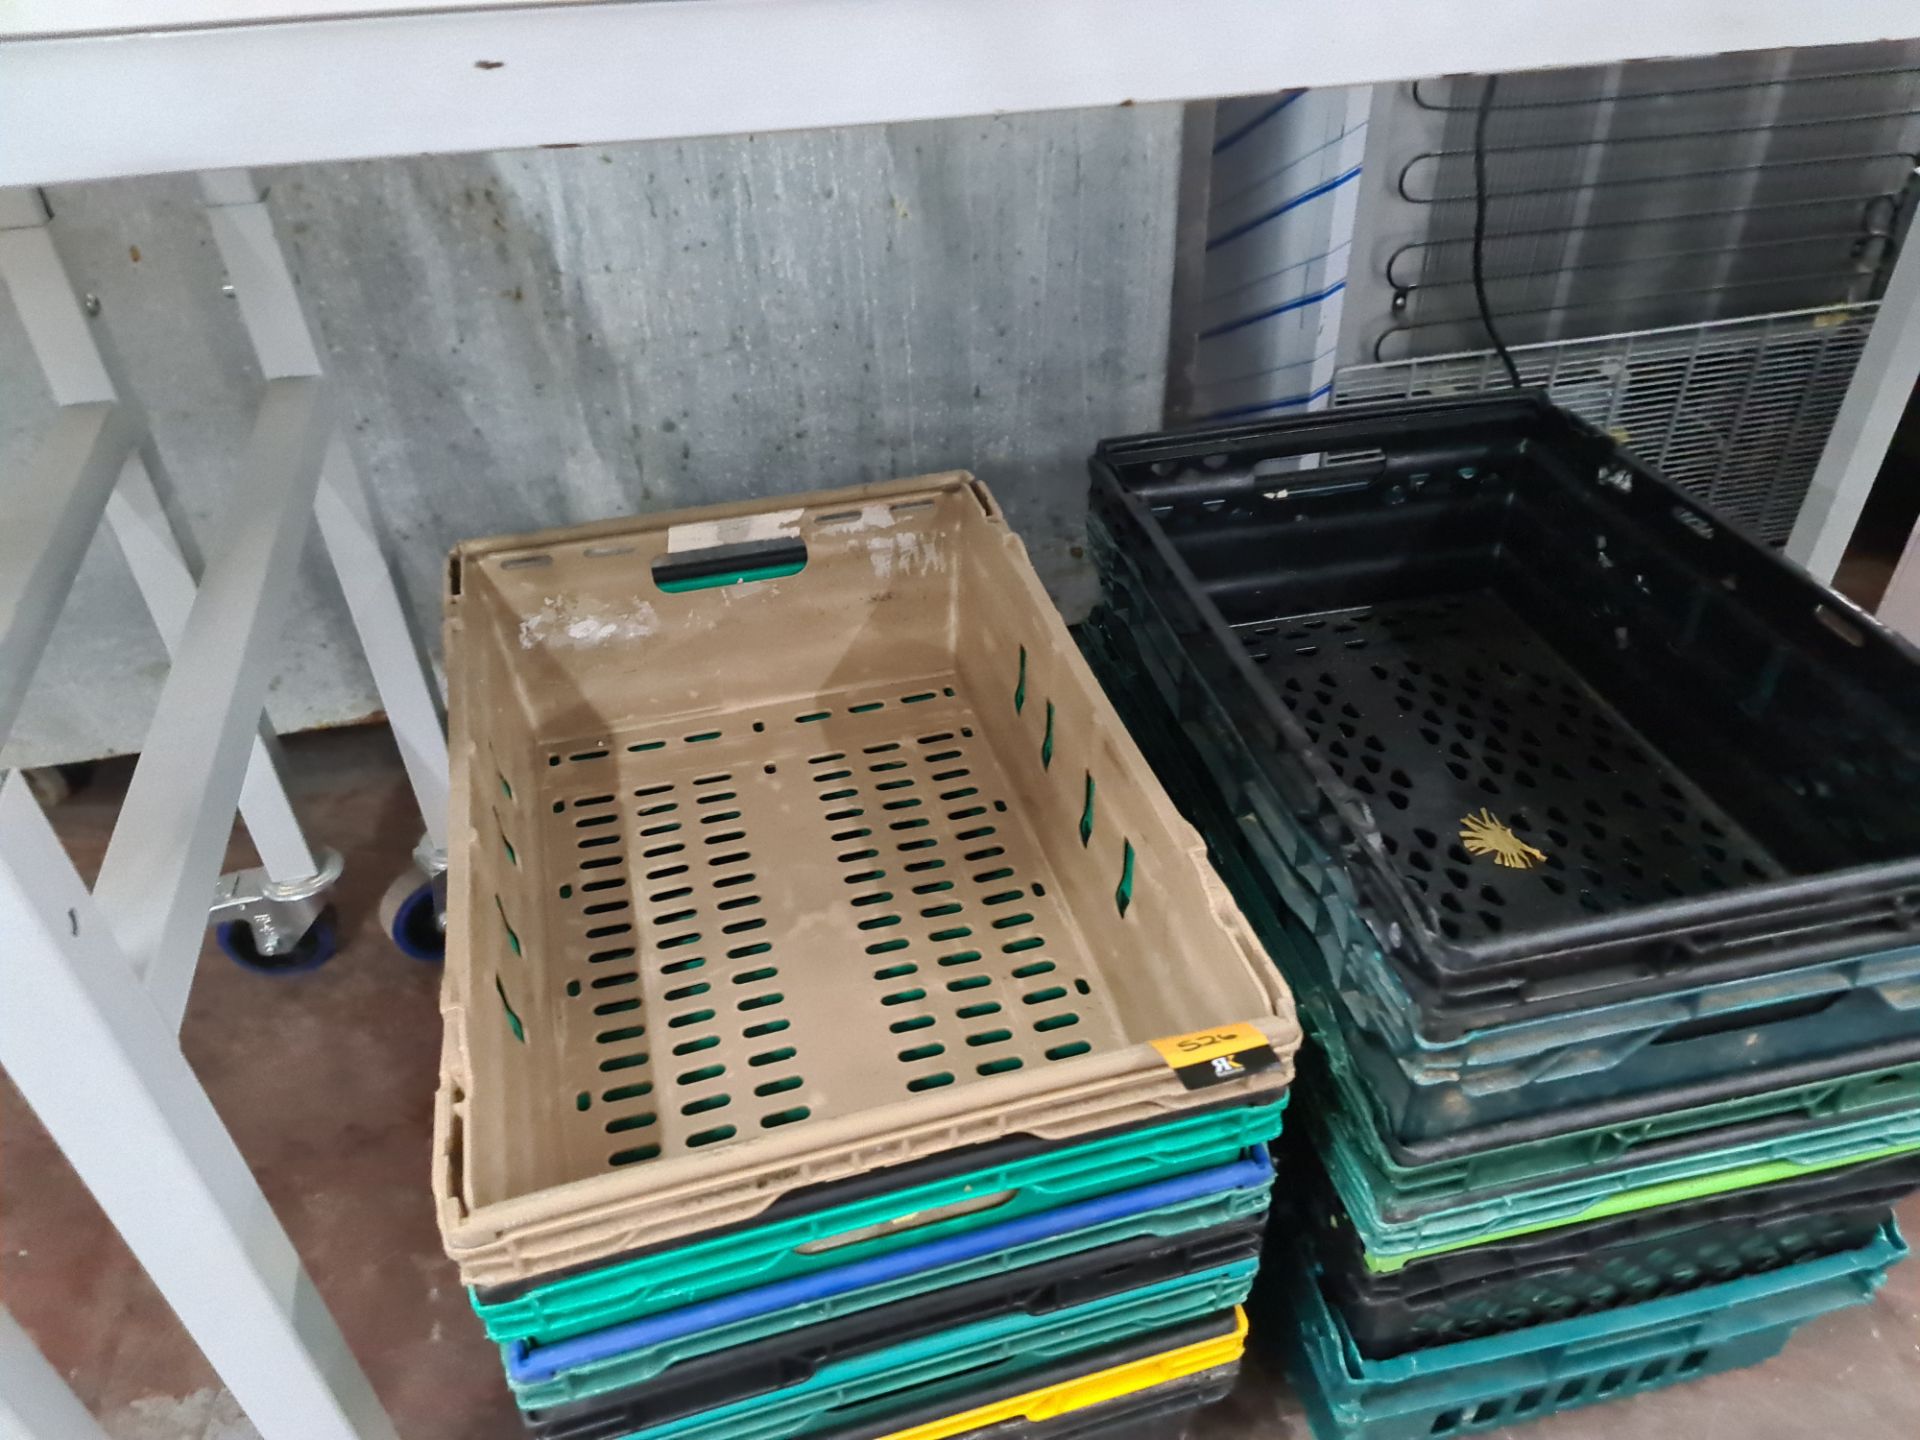 2 stacks of plastic crates - Image 4 of 4